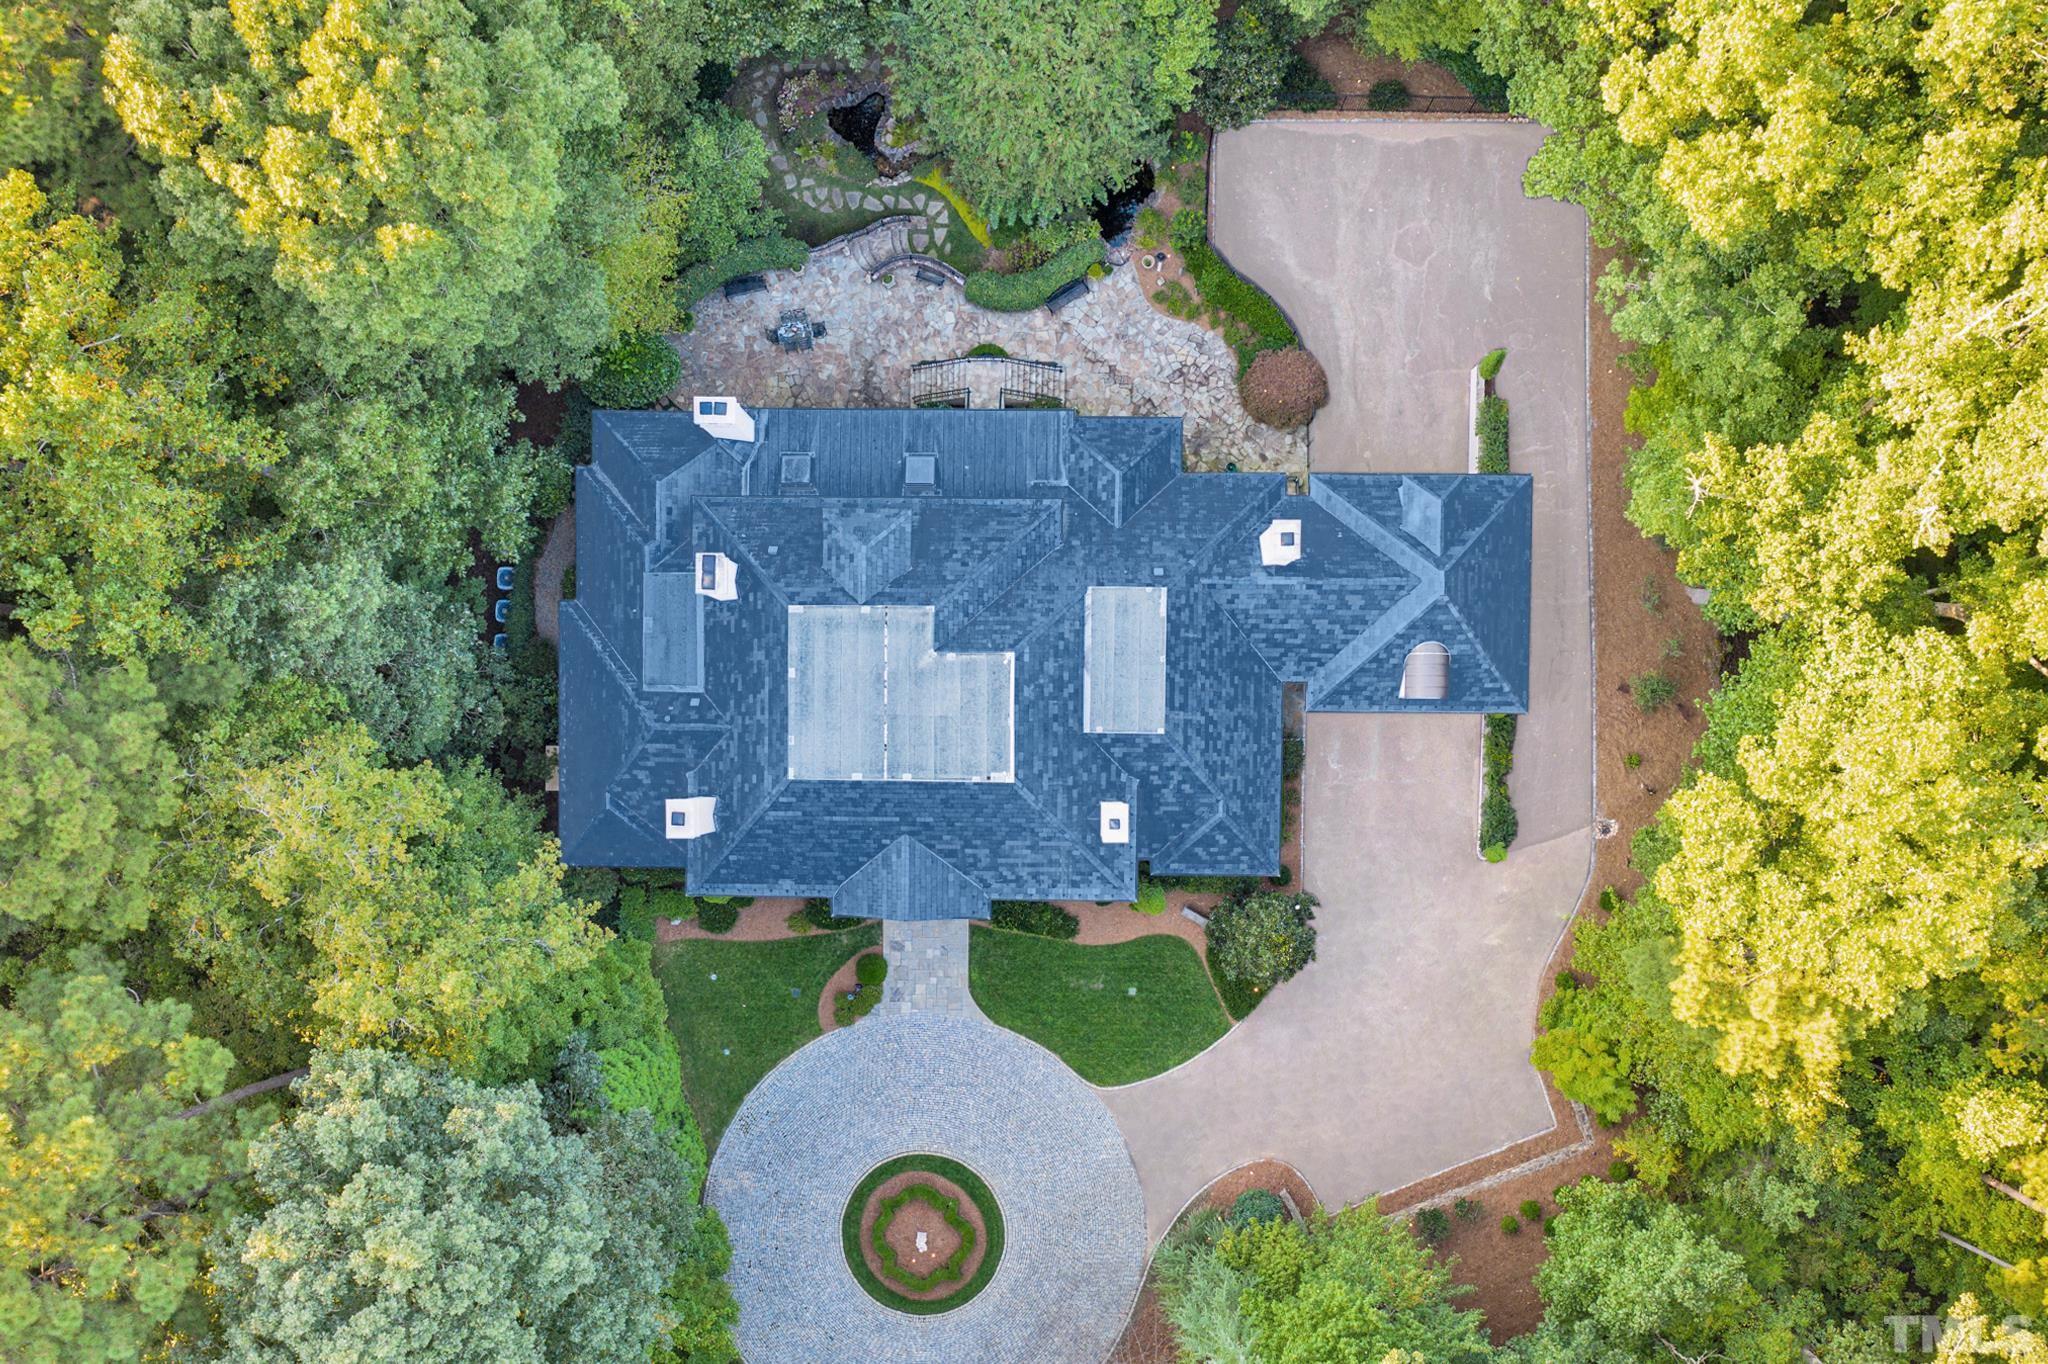 Breathtaking aerial view showing the privacy the owners have. Community swimming pool, basketball court, and playground for kids, and 40 acres of protected lands. Costs $5.5M to custom build in 2007/2008